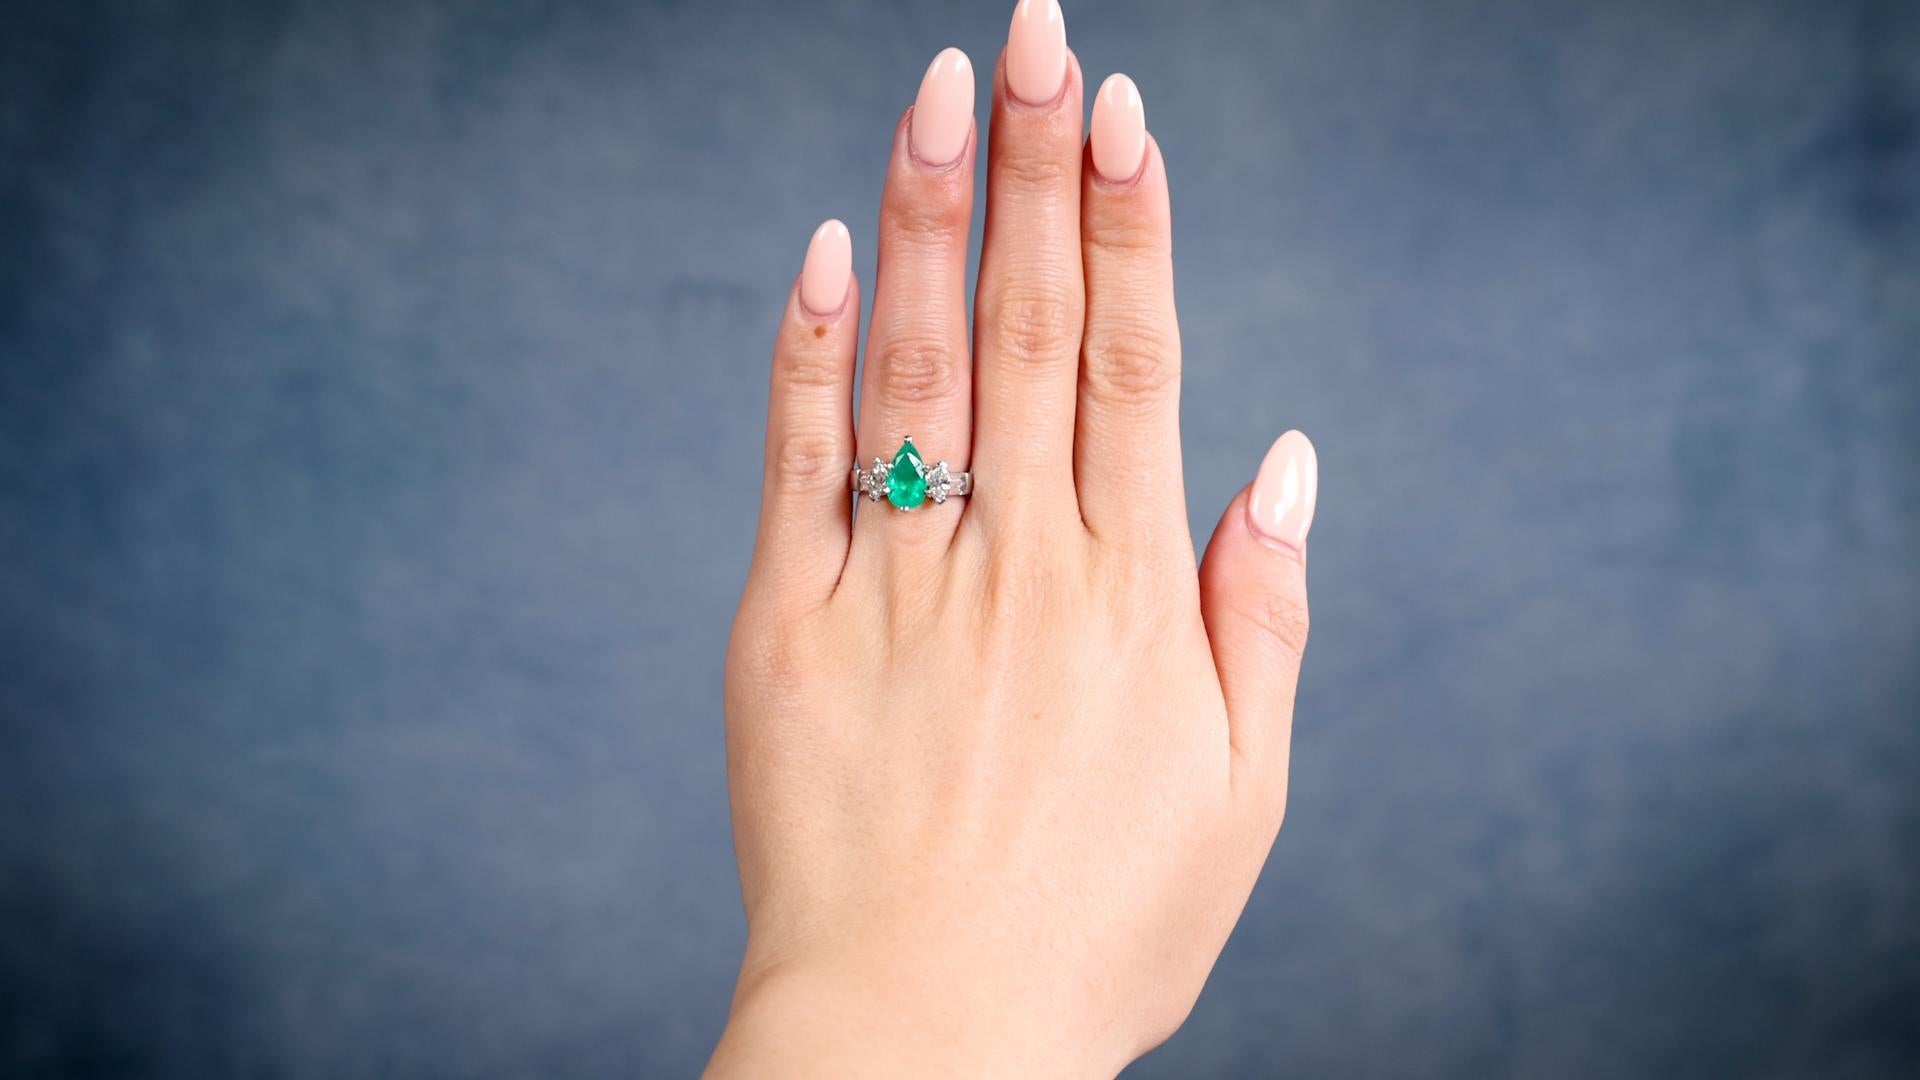 One Vintage Emerald Diamond Platinum Ring. Featuring one pear brilliant cut emerald weighing approximately 1.00 carat. Accented by two marquise and four baguette cut diamonds with a total weight of 0.65 carat, graded G-H color, VS clarity. Crafted